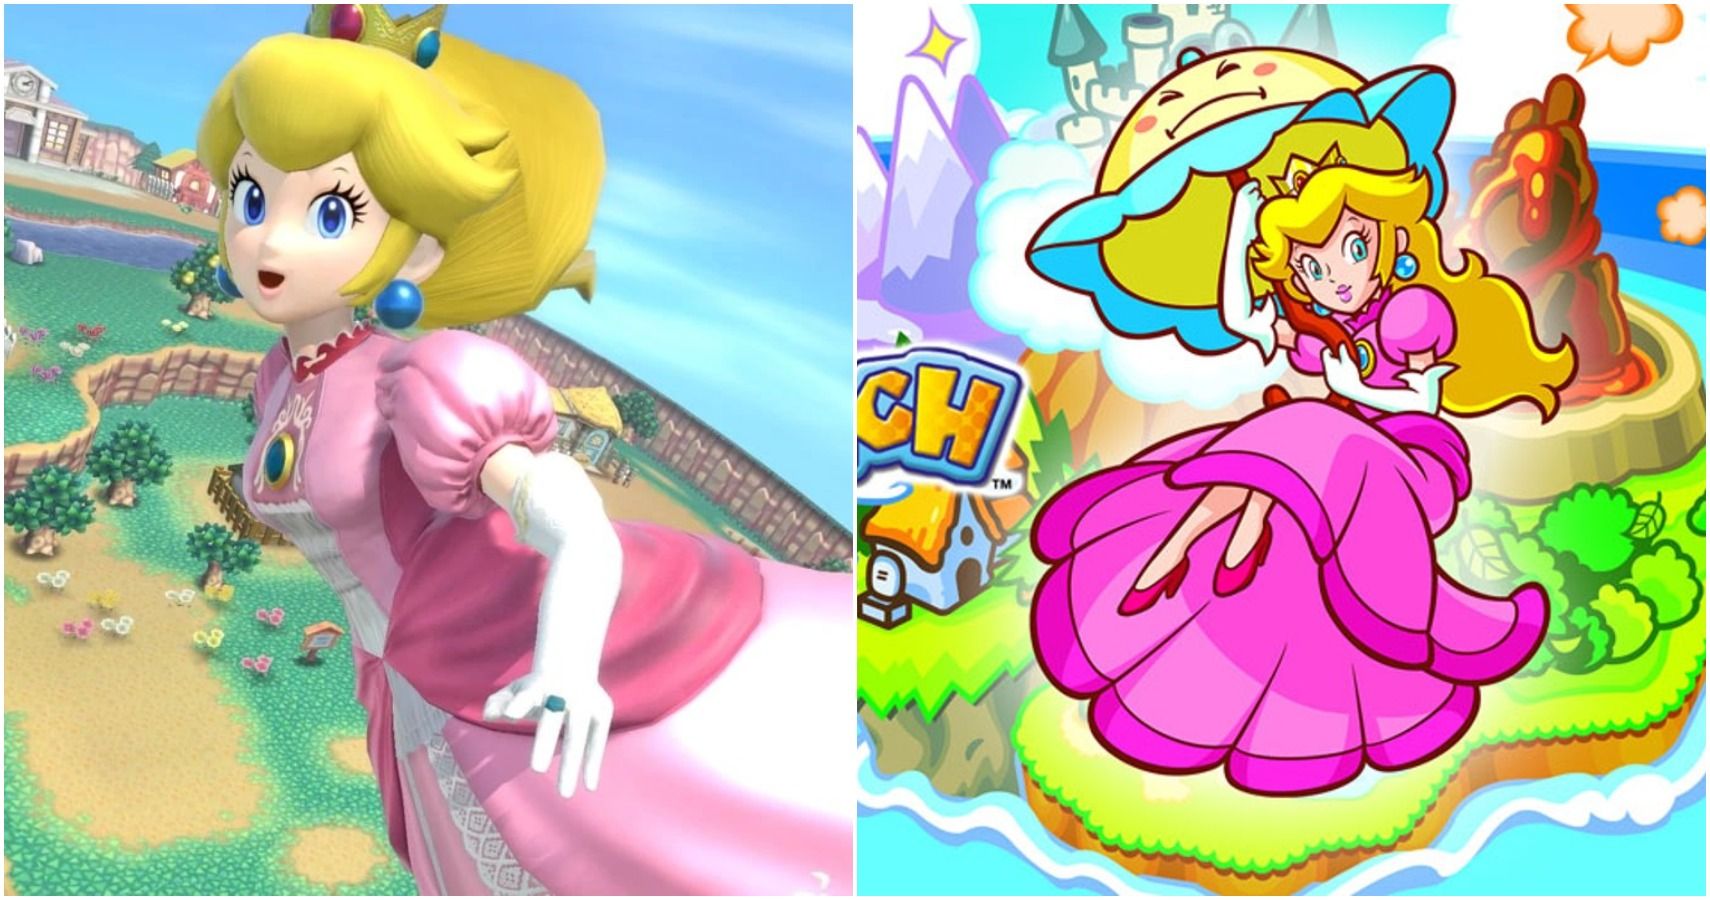 Mario And Peach Together